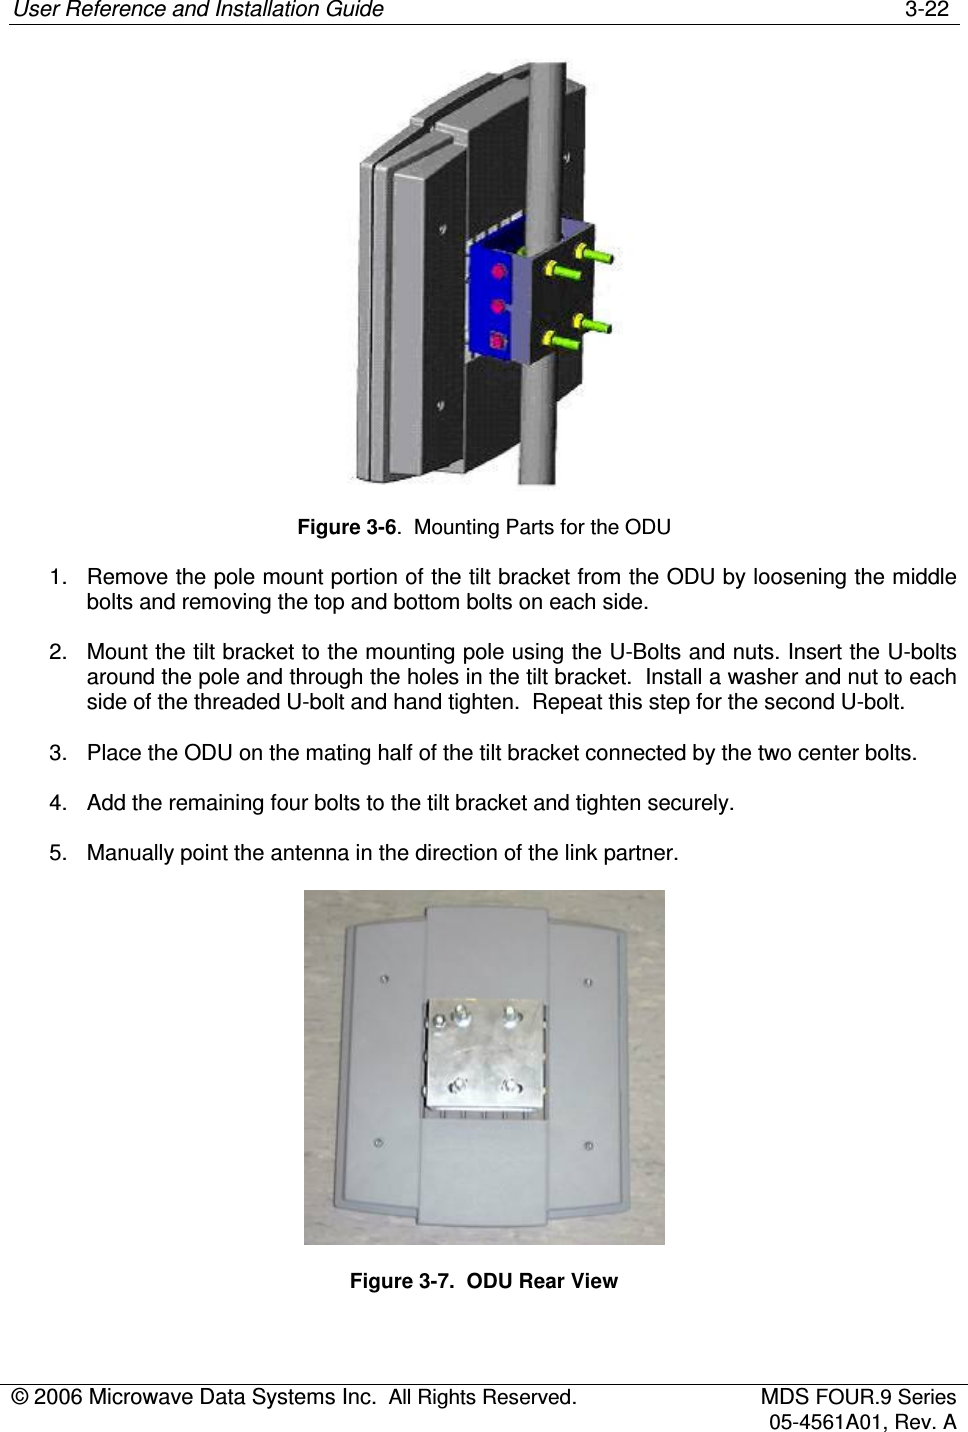 User Reference and Installation Guide    3-22 © 2006 Microwave Data Systems Inc.  All Rights Reserved.  MDS FOUR.9 Series 05-4561A01, Rev. A   Figure 3-6.  Mounting Parts for the ODU 1.  Remove the pole mount portion of the tilt bracket from the ODU by loosening the middle bolts and removing the top and bottom bolts on each side. 2.  Mount the tilt bracket to the mounting pole using the U-Bolts and nuts. Insert the U-bolts around the pole and through the holes in the tilt bracket.  Install a washer and nut to each side of the threaded U-bolt and hand tighten.  Repeat this step for the second U-bolt. 3.  Place the ODU on the mating half of the tilt bracket connected by the two center bolts. 4.  Add the remaining four bolts to the tilt bracket and tighten securely. 5.  Manually point the antenna in the direction of the link partner.  Figure 3-7.  ODU Rear View  